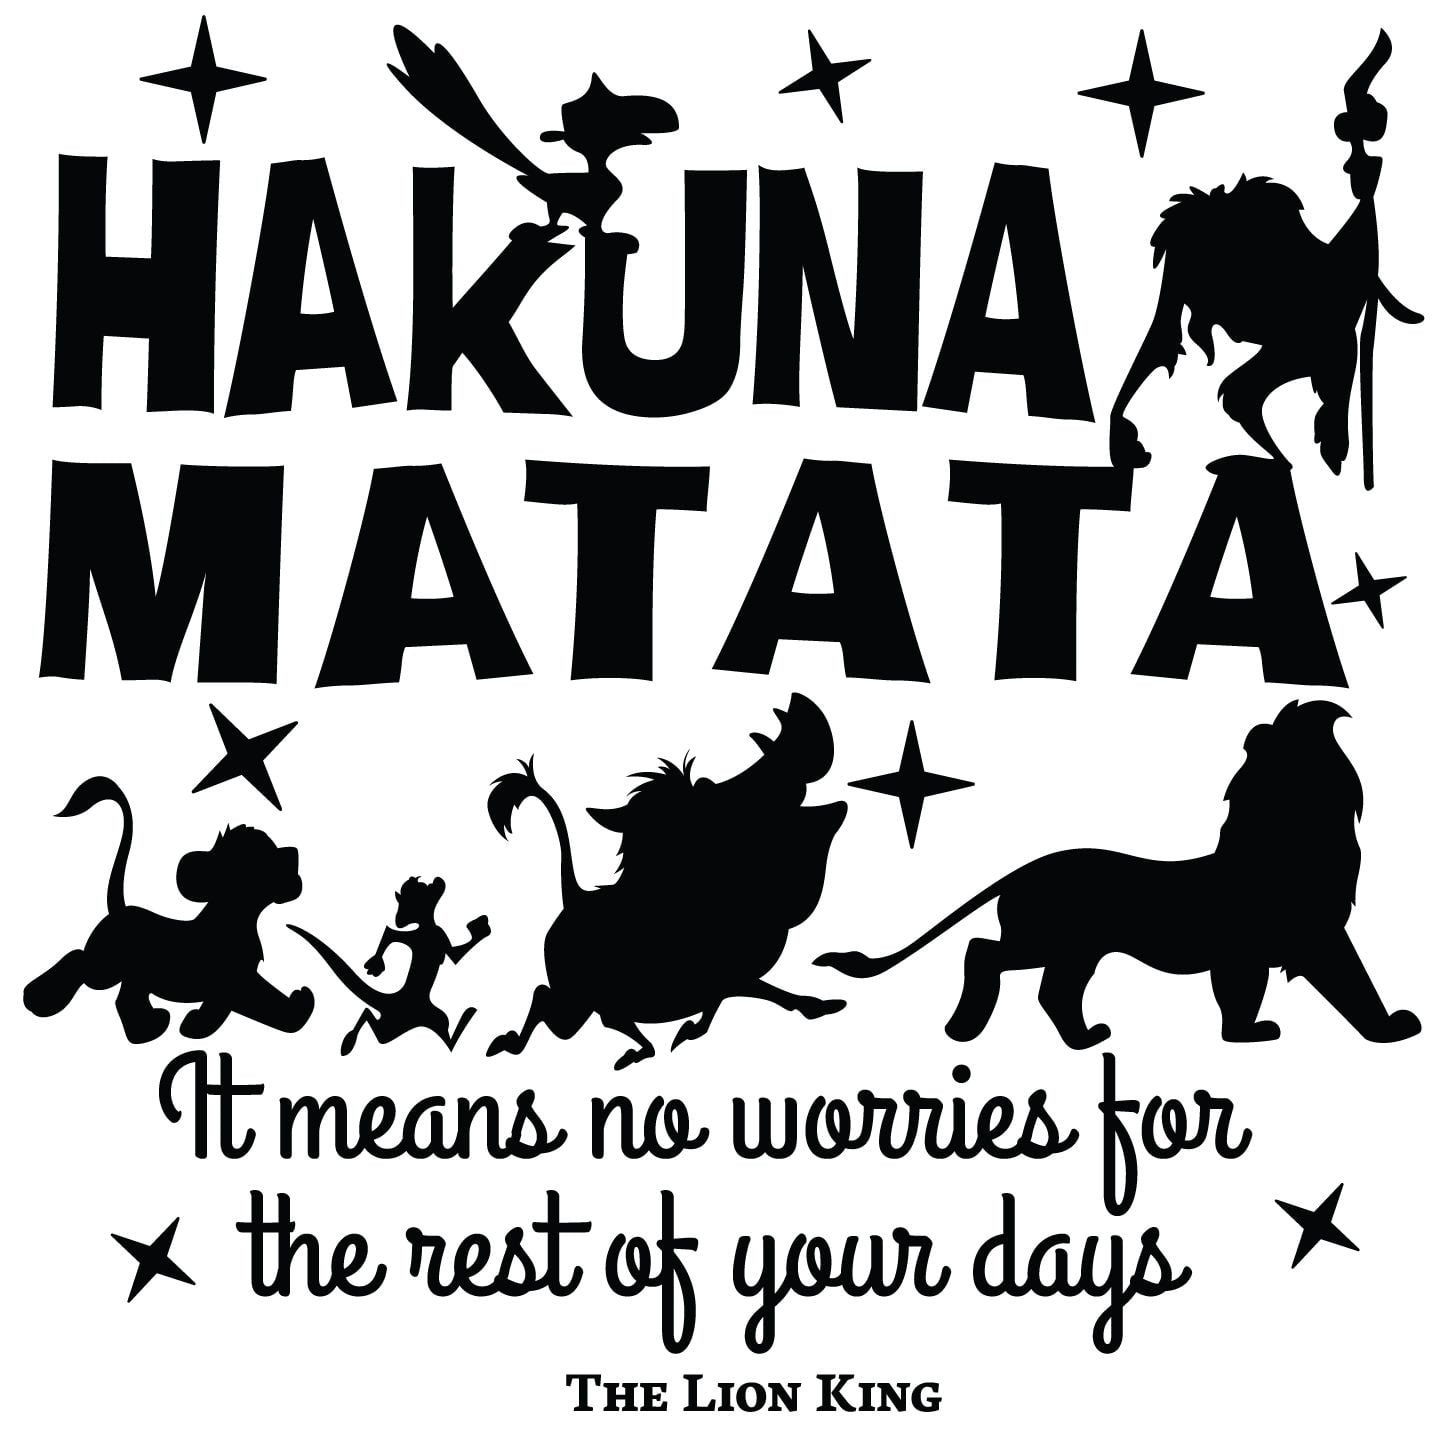 LION KING QUOTE SHABBY CHIC SIGN HAKUNA MATATA MEANS NO WORRIES